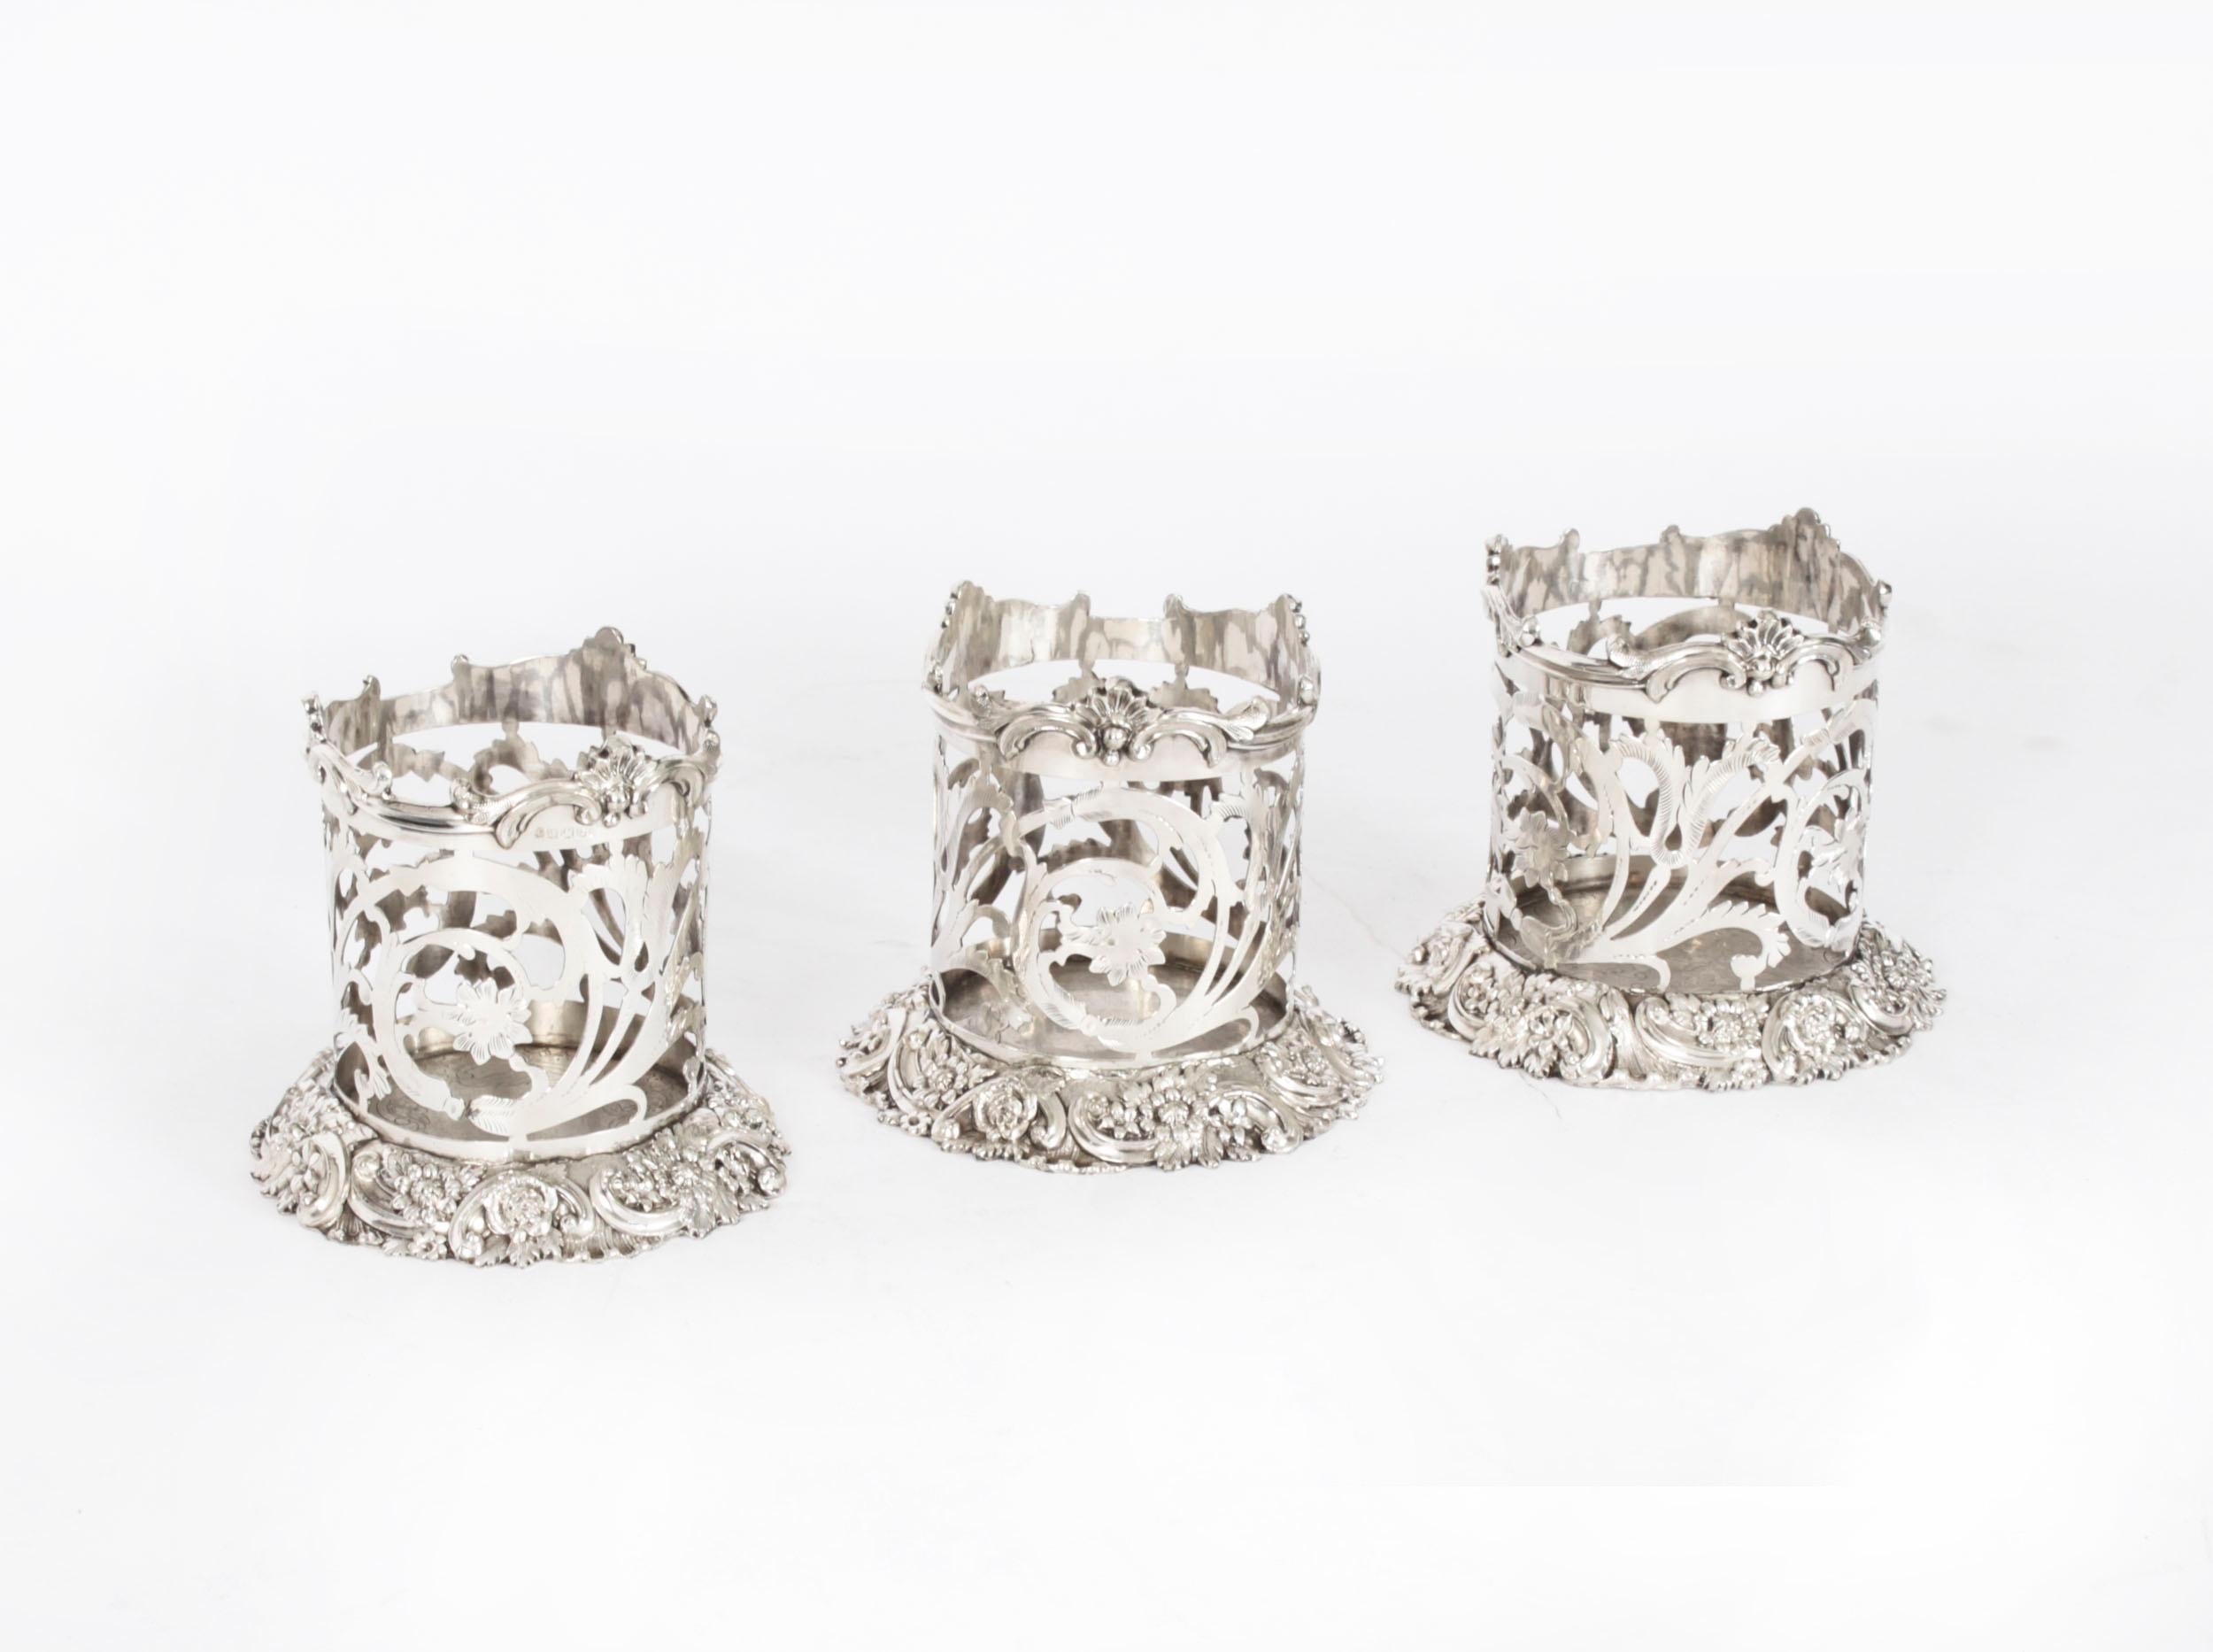 This is a lovely set of three Victorian silver-plated wine bottle coasters /  holders, circa 1870 in date. 
 
They feature pierced cylindrical sides with bases heavily decorated with embossed and engraved foliate and floral decoration.
 
The unique